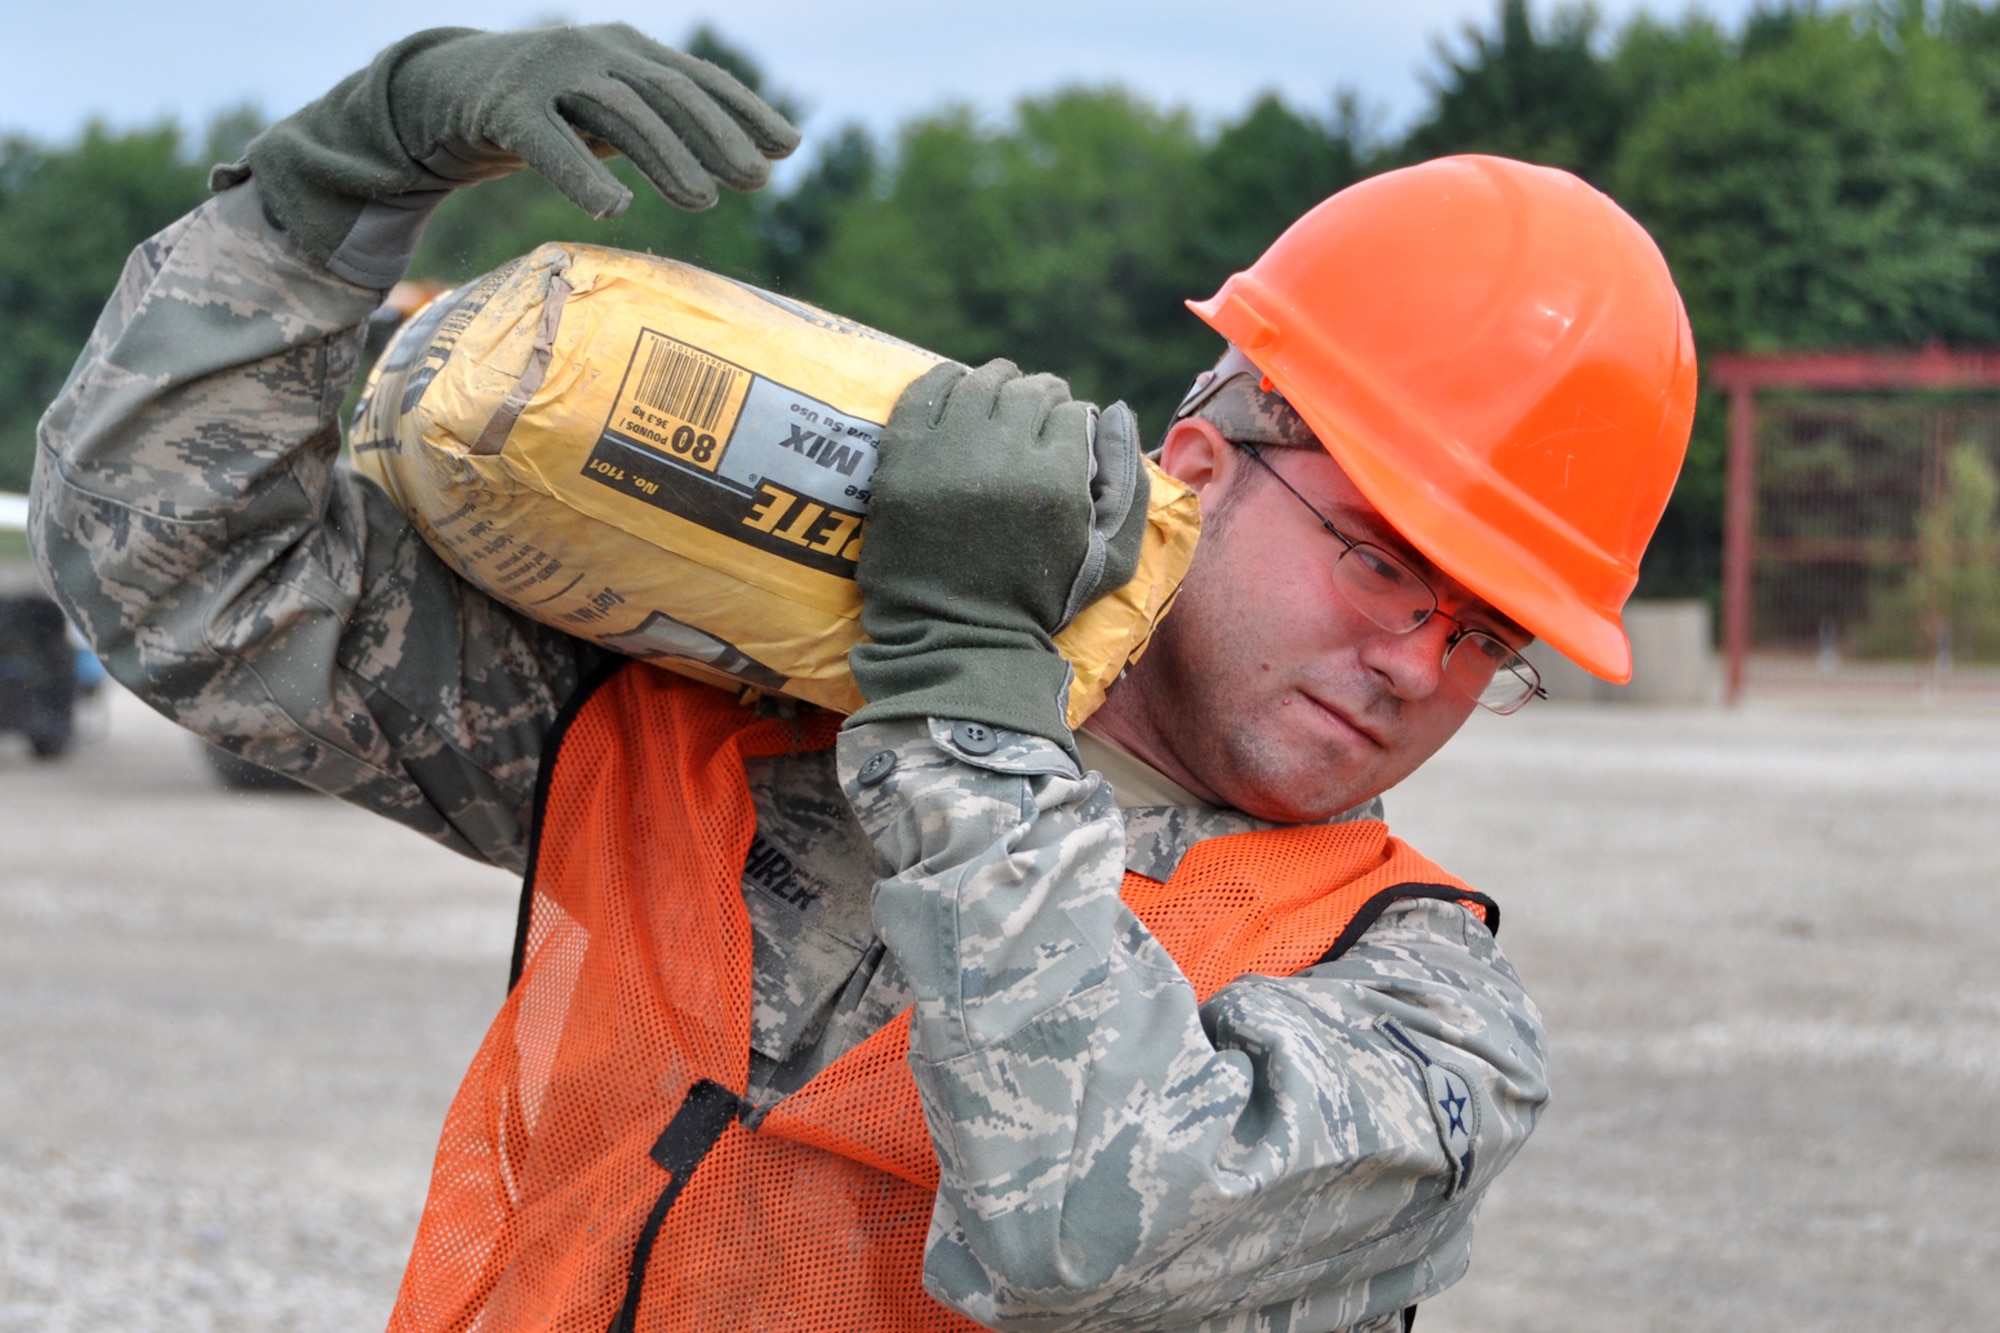 Airman 1st Class Zachary Buhrer, knowledge operations management, 307th Civil Engineer Squadron, transports a bag of cement at Youngstown Air Reserve Station, Vienna, Ohio, Aug. 14, 2012. Buhrer was part of a 29-person detail from Barksdale Air Force Base, La., that spent two weeks at Youngstown assisting the 910 Civil Engineer Squadron build a Prime Base Engineer Emergency Force (Prime BEEF) training area. (U.S. Air Force photo by Master Sgt. Jeff Walston)